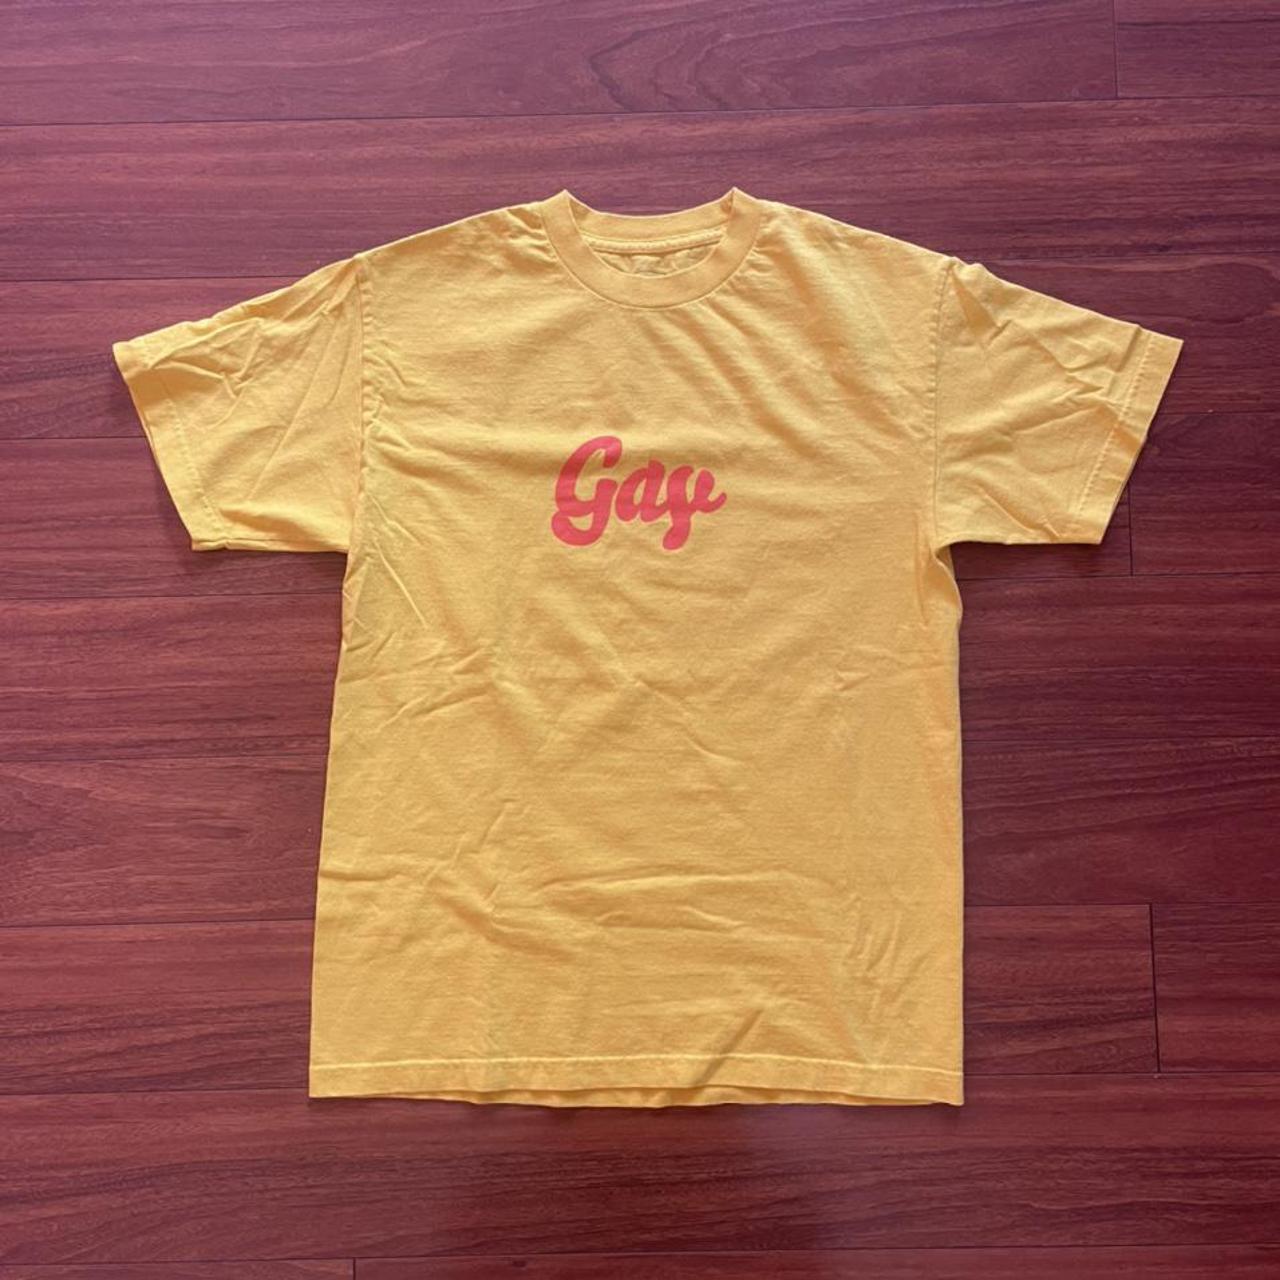 Product Image 1 - “Gay” T-Shirt
Brockhampton
Yellow
Size Med 
Condition: worn